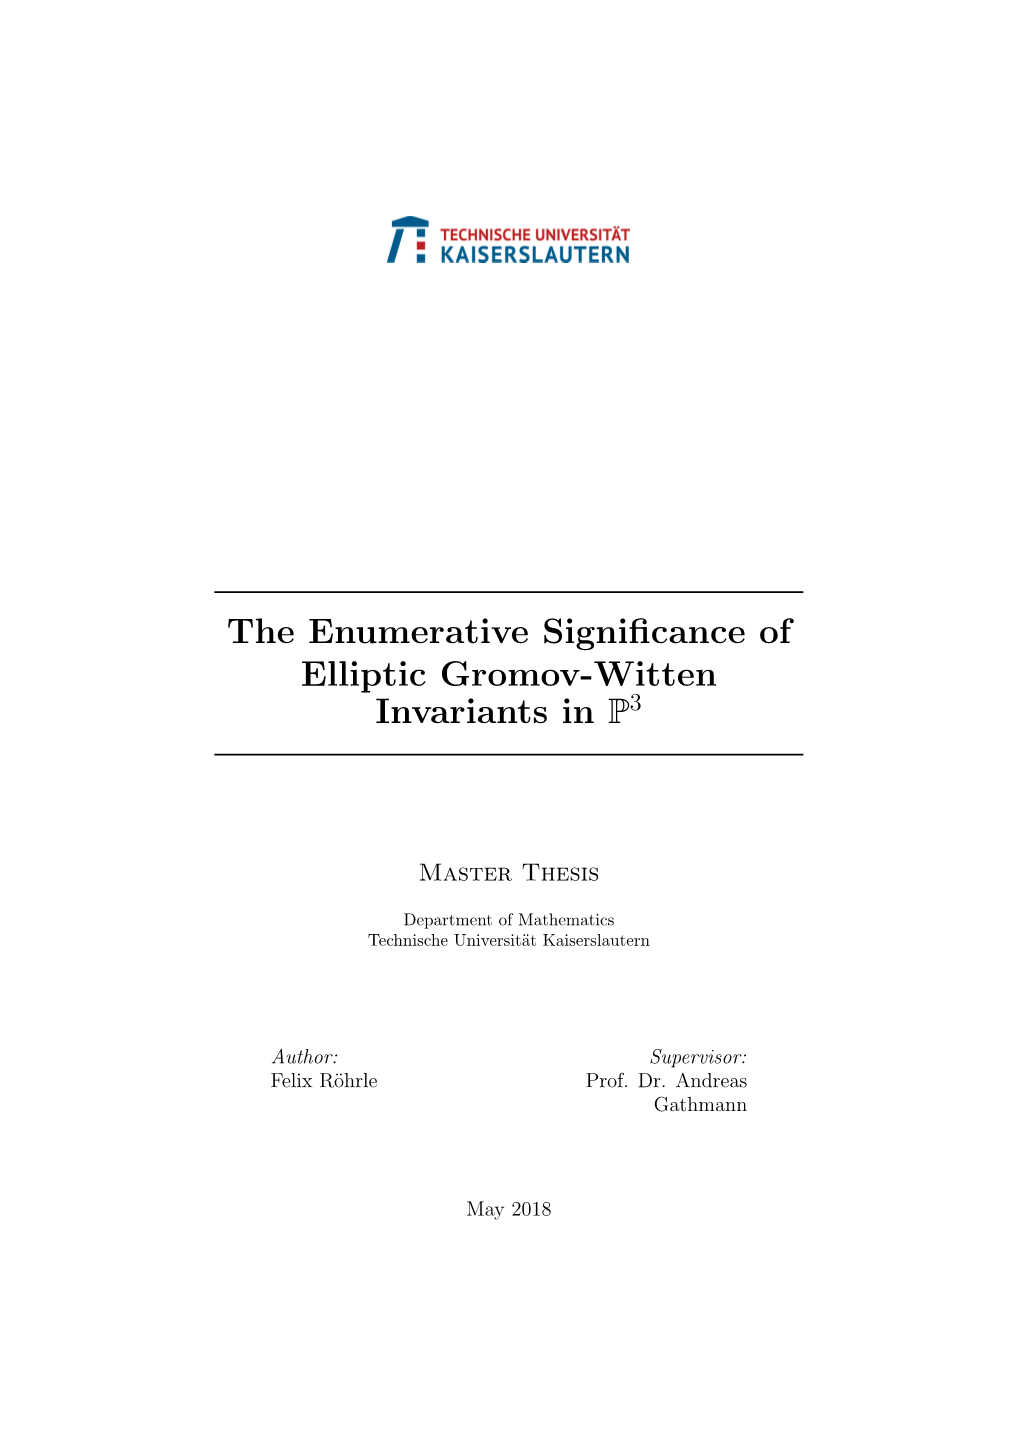 The Enumerative Significance of Elliptic Gromov-Witten Invariants in P